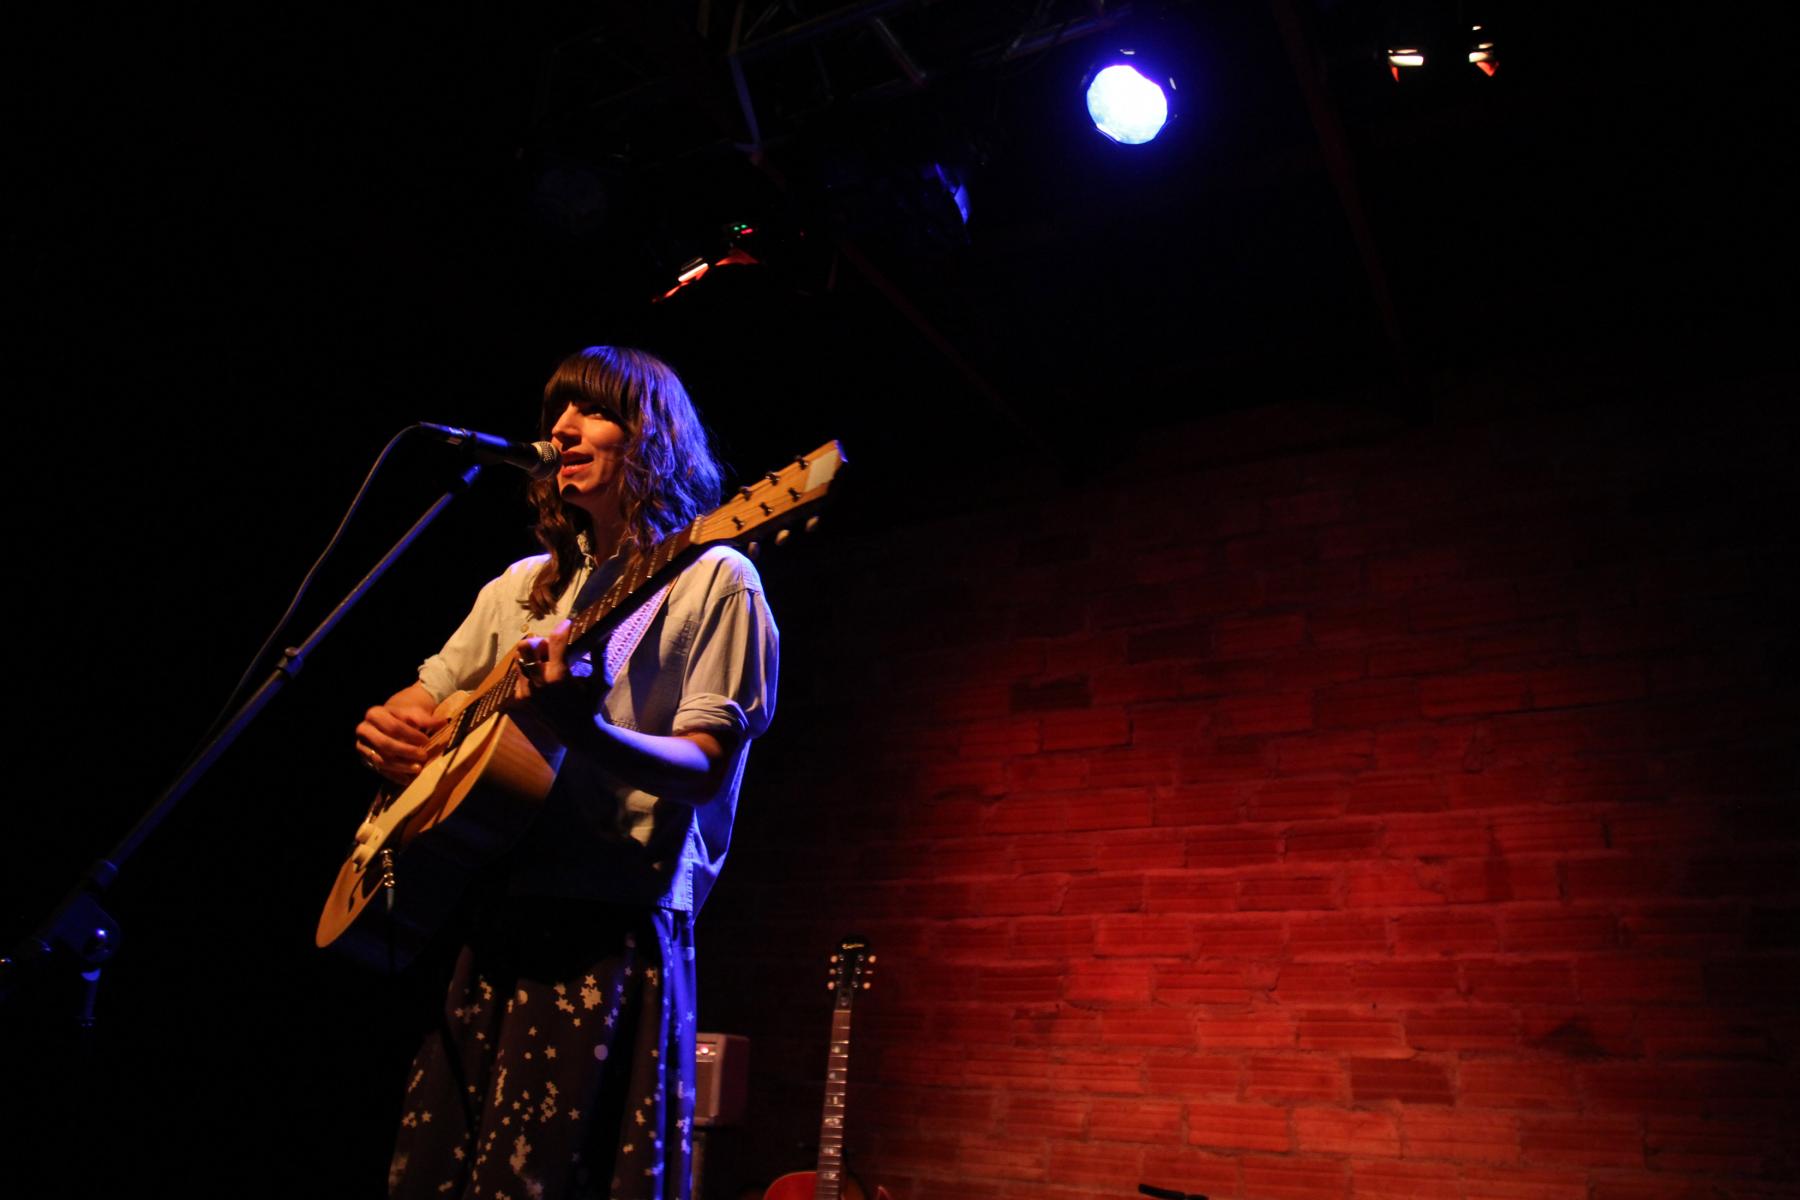 Eleanor Friedberger, performing at the Crowley Theater, 24 March 2012. Photo by Alberto Tomas Halpern.